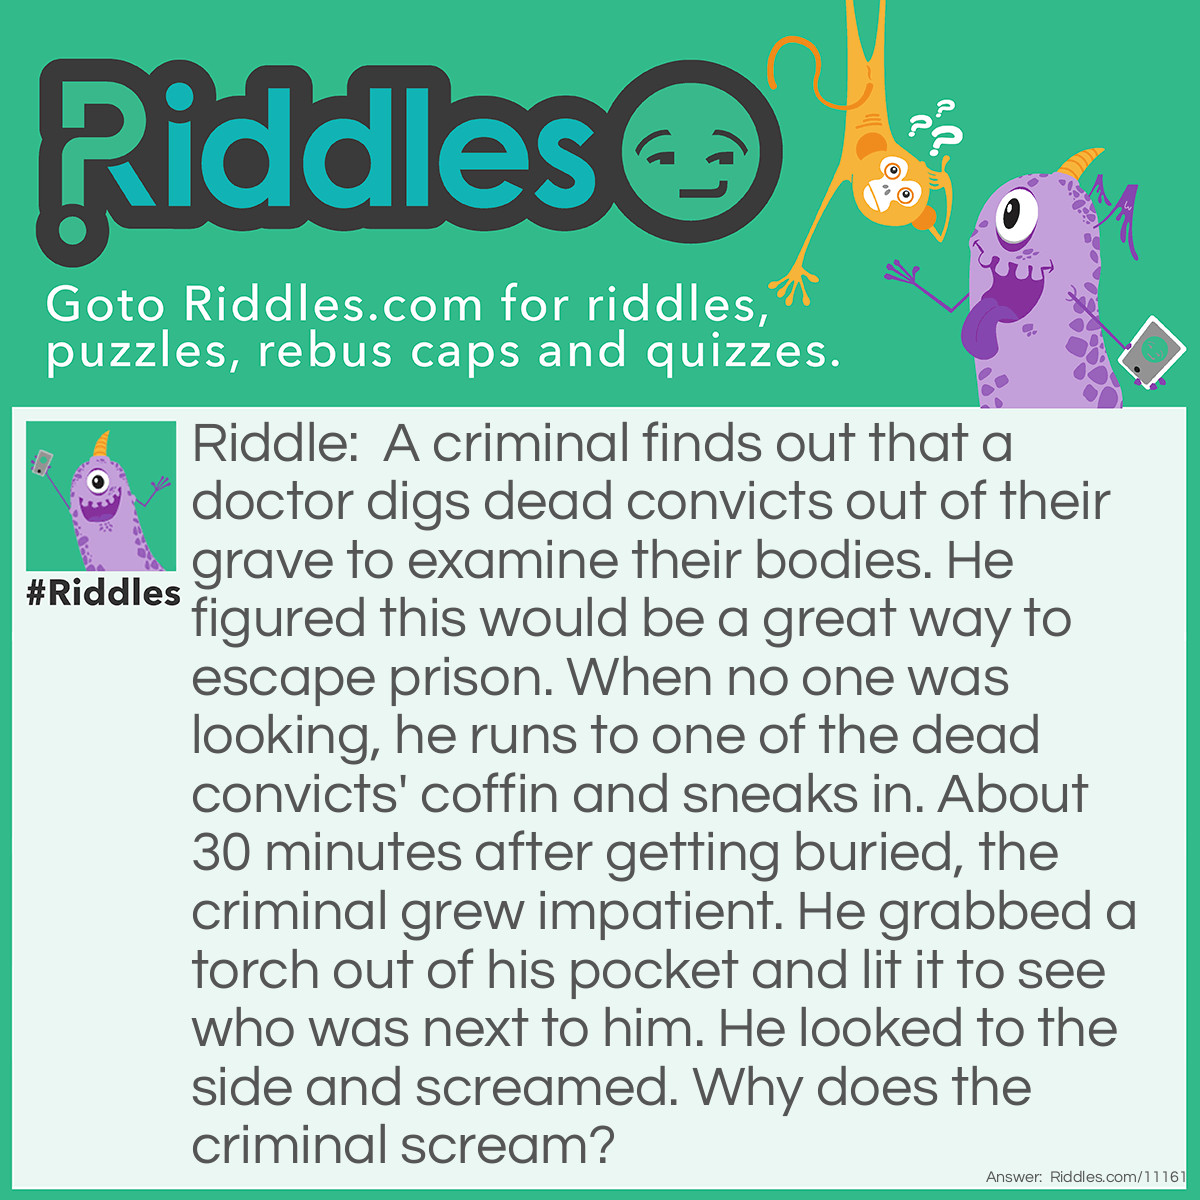 Riddle: A criminal finds out that a doctor digs dead convicts out of their grave to examine their bodies. He figured this would be a great way to escape prison. When no one was looking, he runs to one of the dead convicts' coffin and sneaks in. About 30 minutes after getting buried, the criminal grew impatient. He grabbed a torch out of his pocket and lit it to see who was next to him. He looked to the side and screamed. Why does the criminal scream? Answer: The doctor's corpse was next to him.